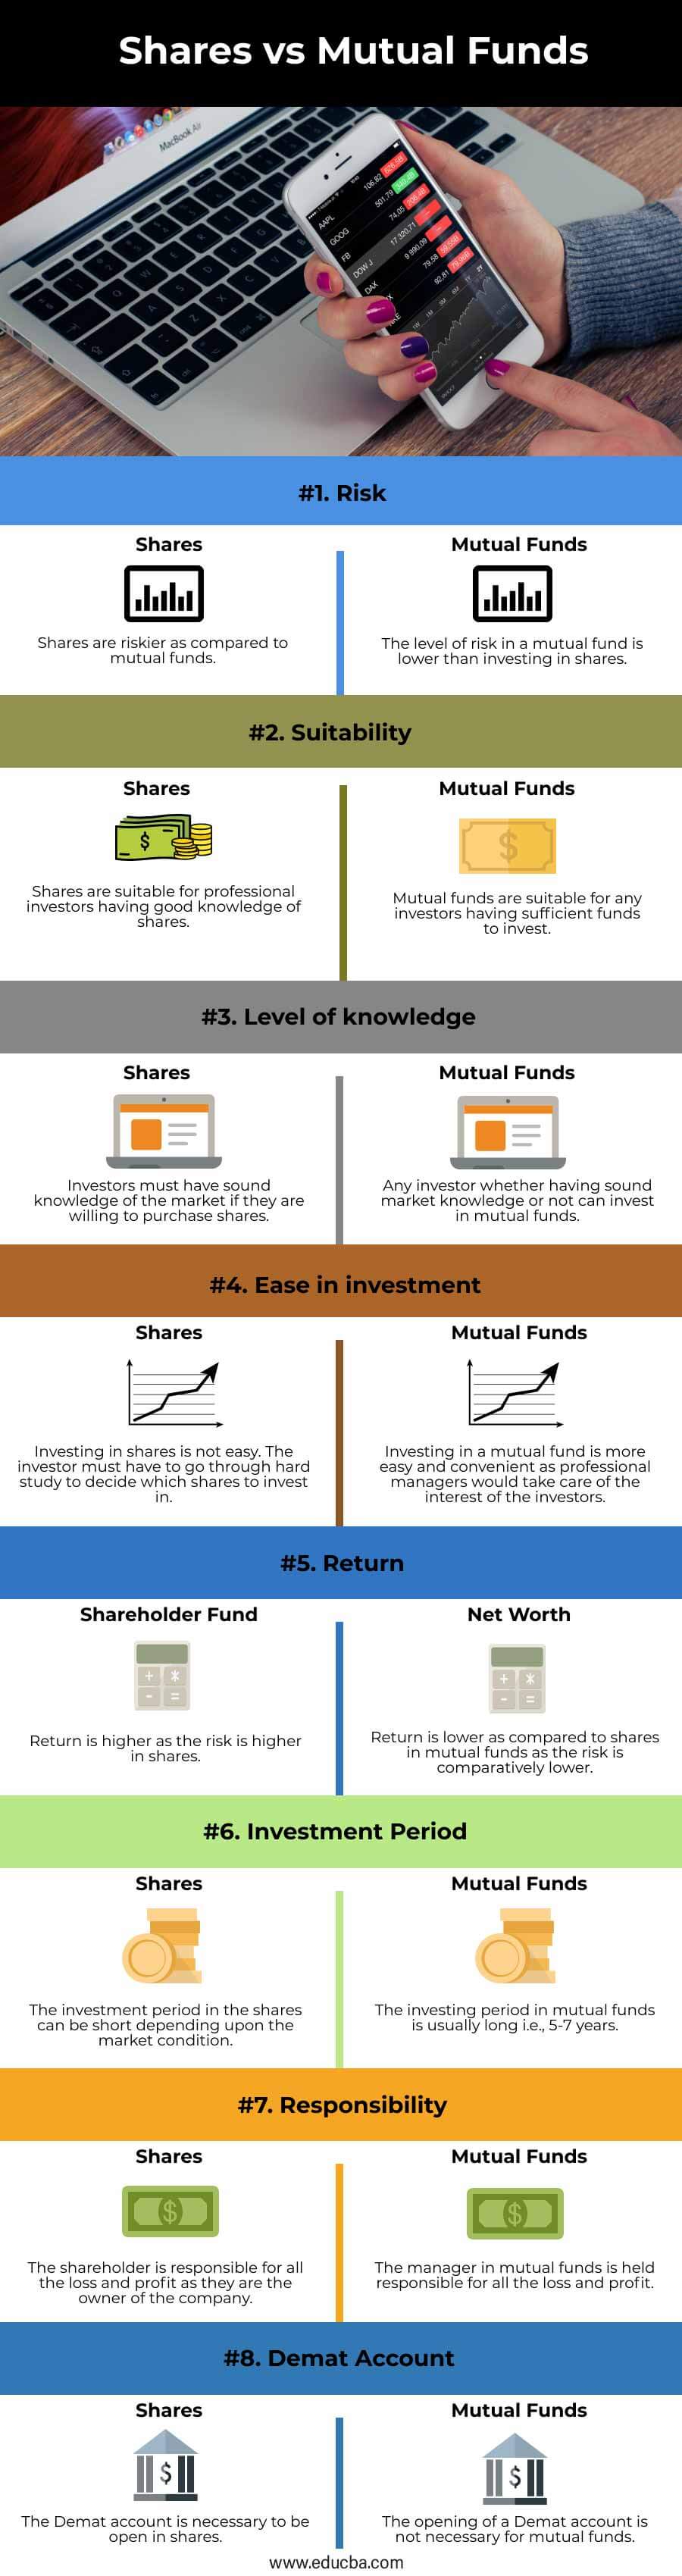 Shares-vs-Mutual-Funds-info